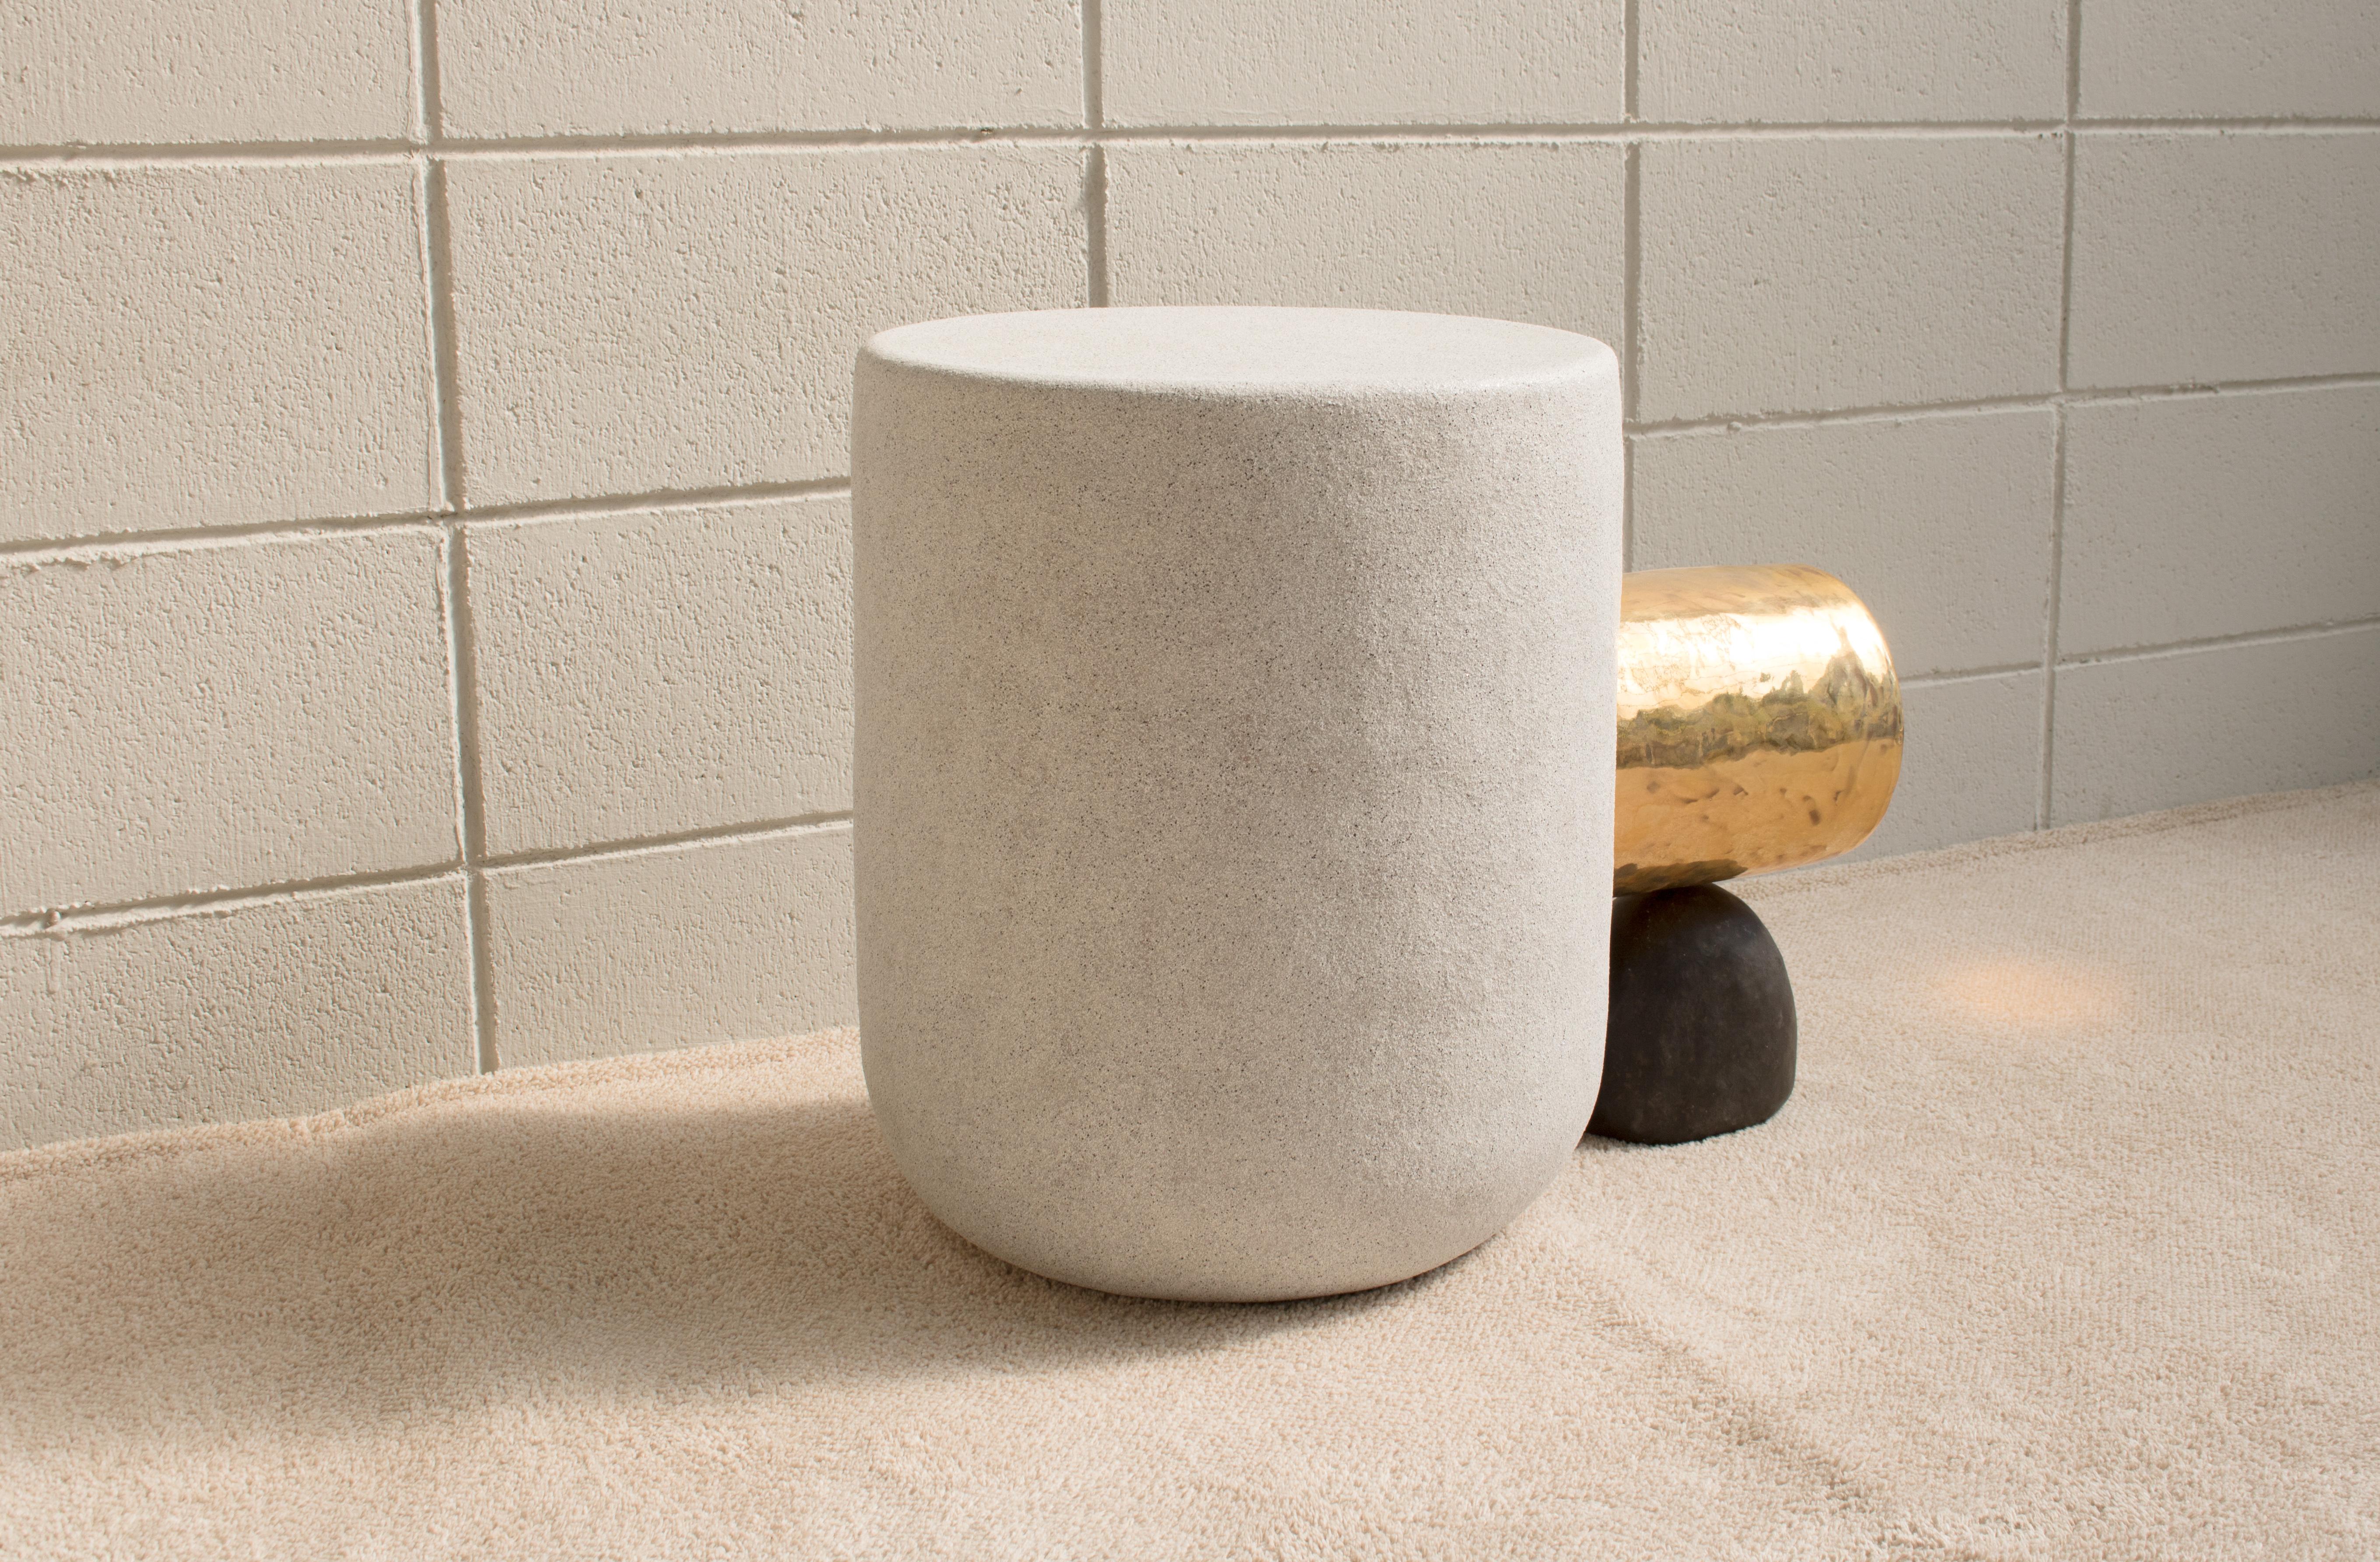 A side table with cylindrical shape. The existing ceramic process was manufactured with clay, the process of making contains the process of biscuit [bisque] firing, the process of glazing, and the process of firing. But this piece was slightly